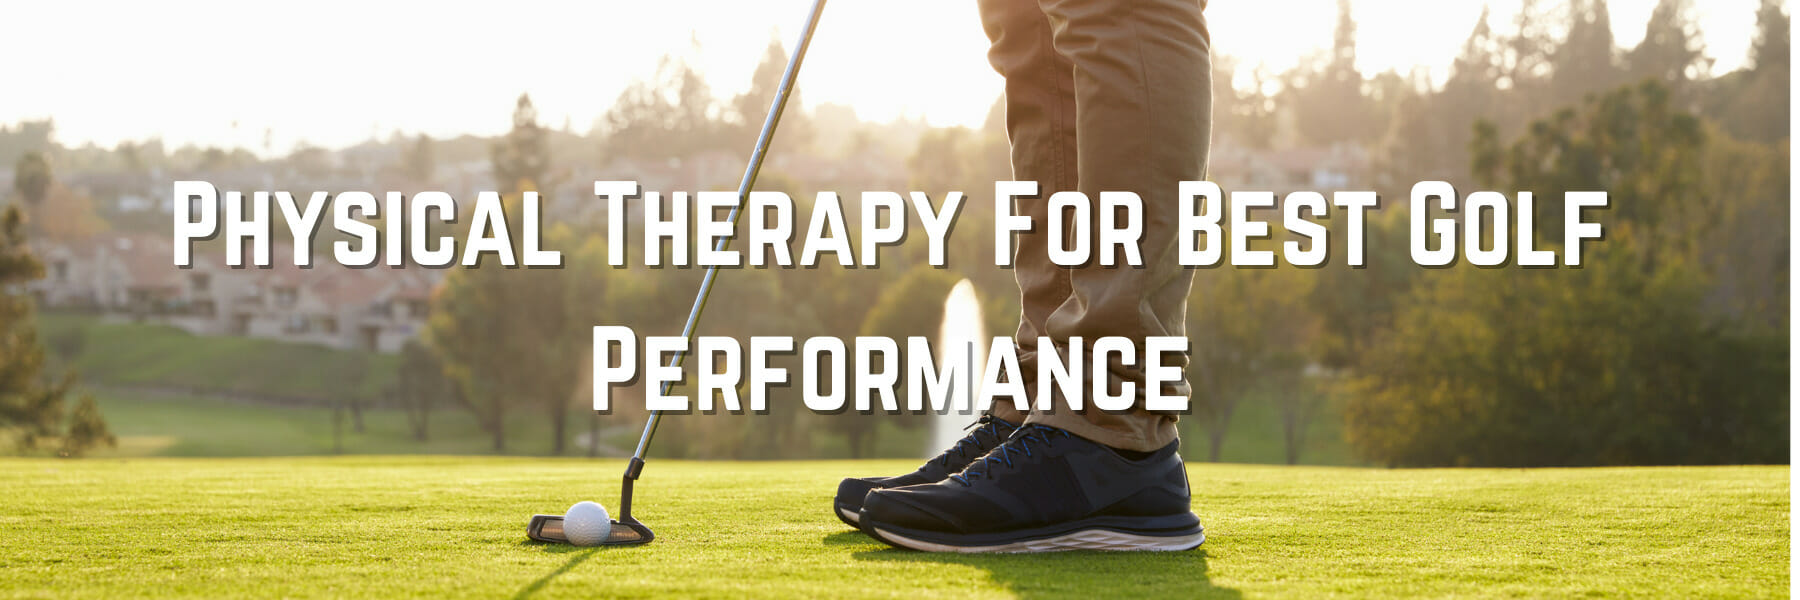 Golf Physical Therapy For Best Golf Performance